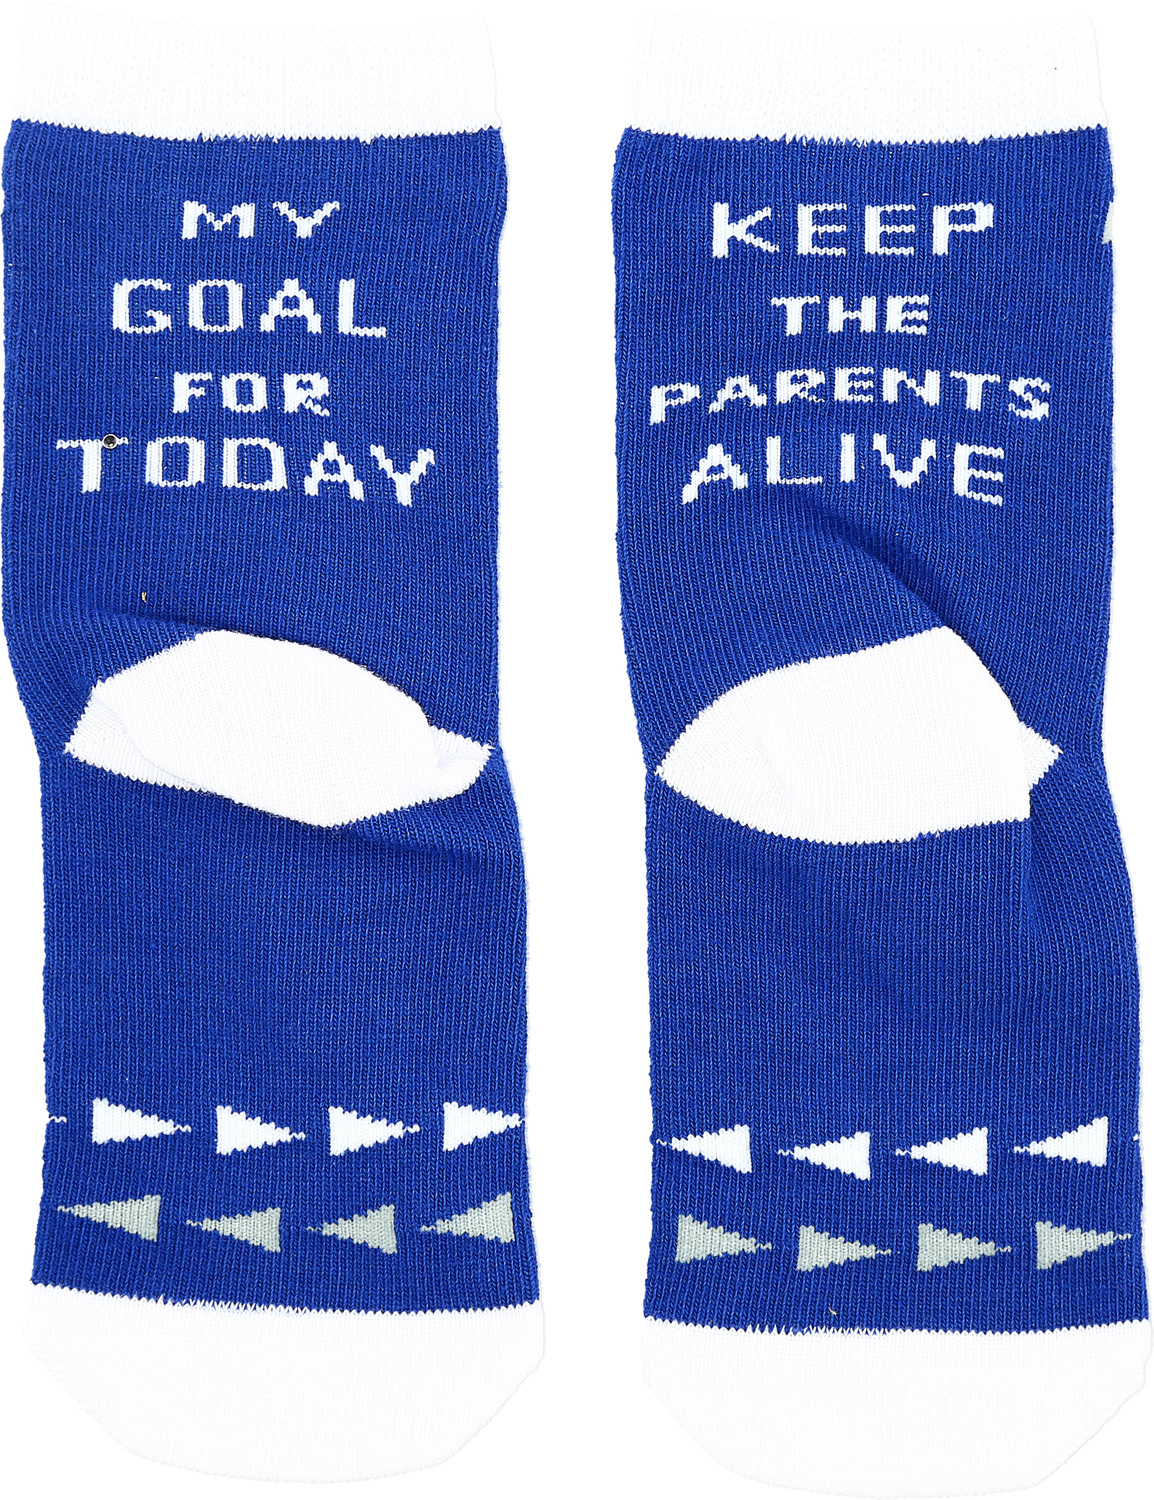 Goal For Today by Sidewalk Talk - Goal For Today - 2T-4T Crew Socks